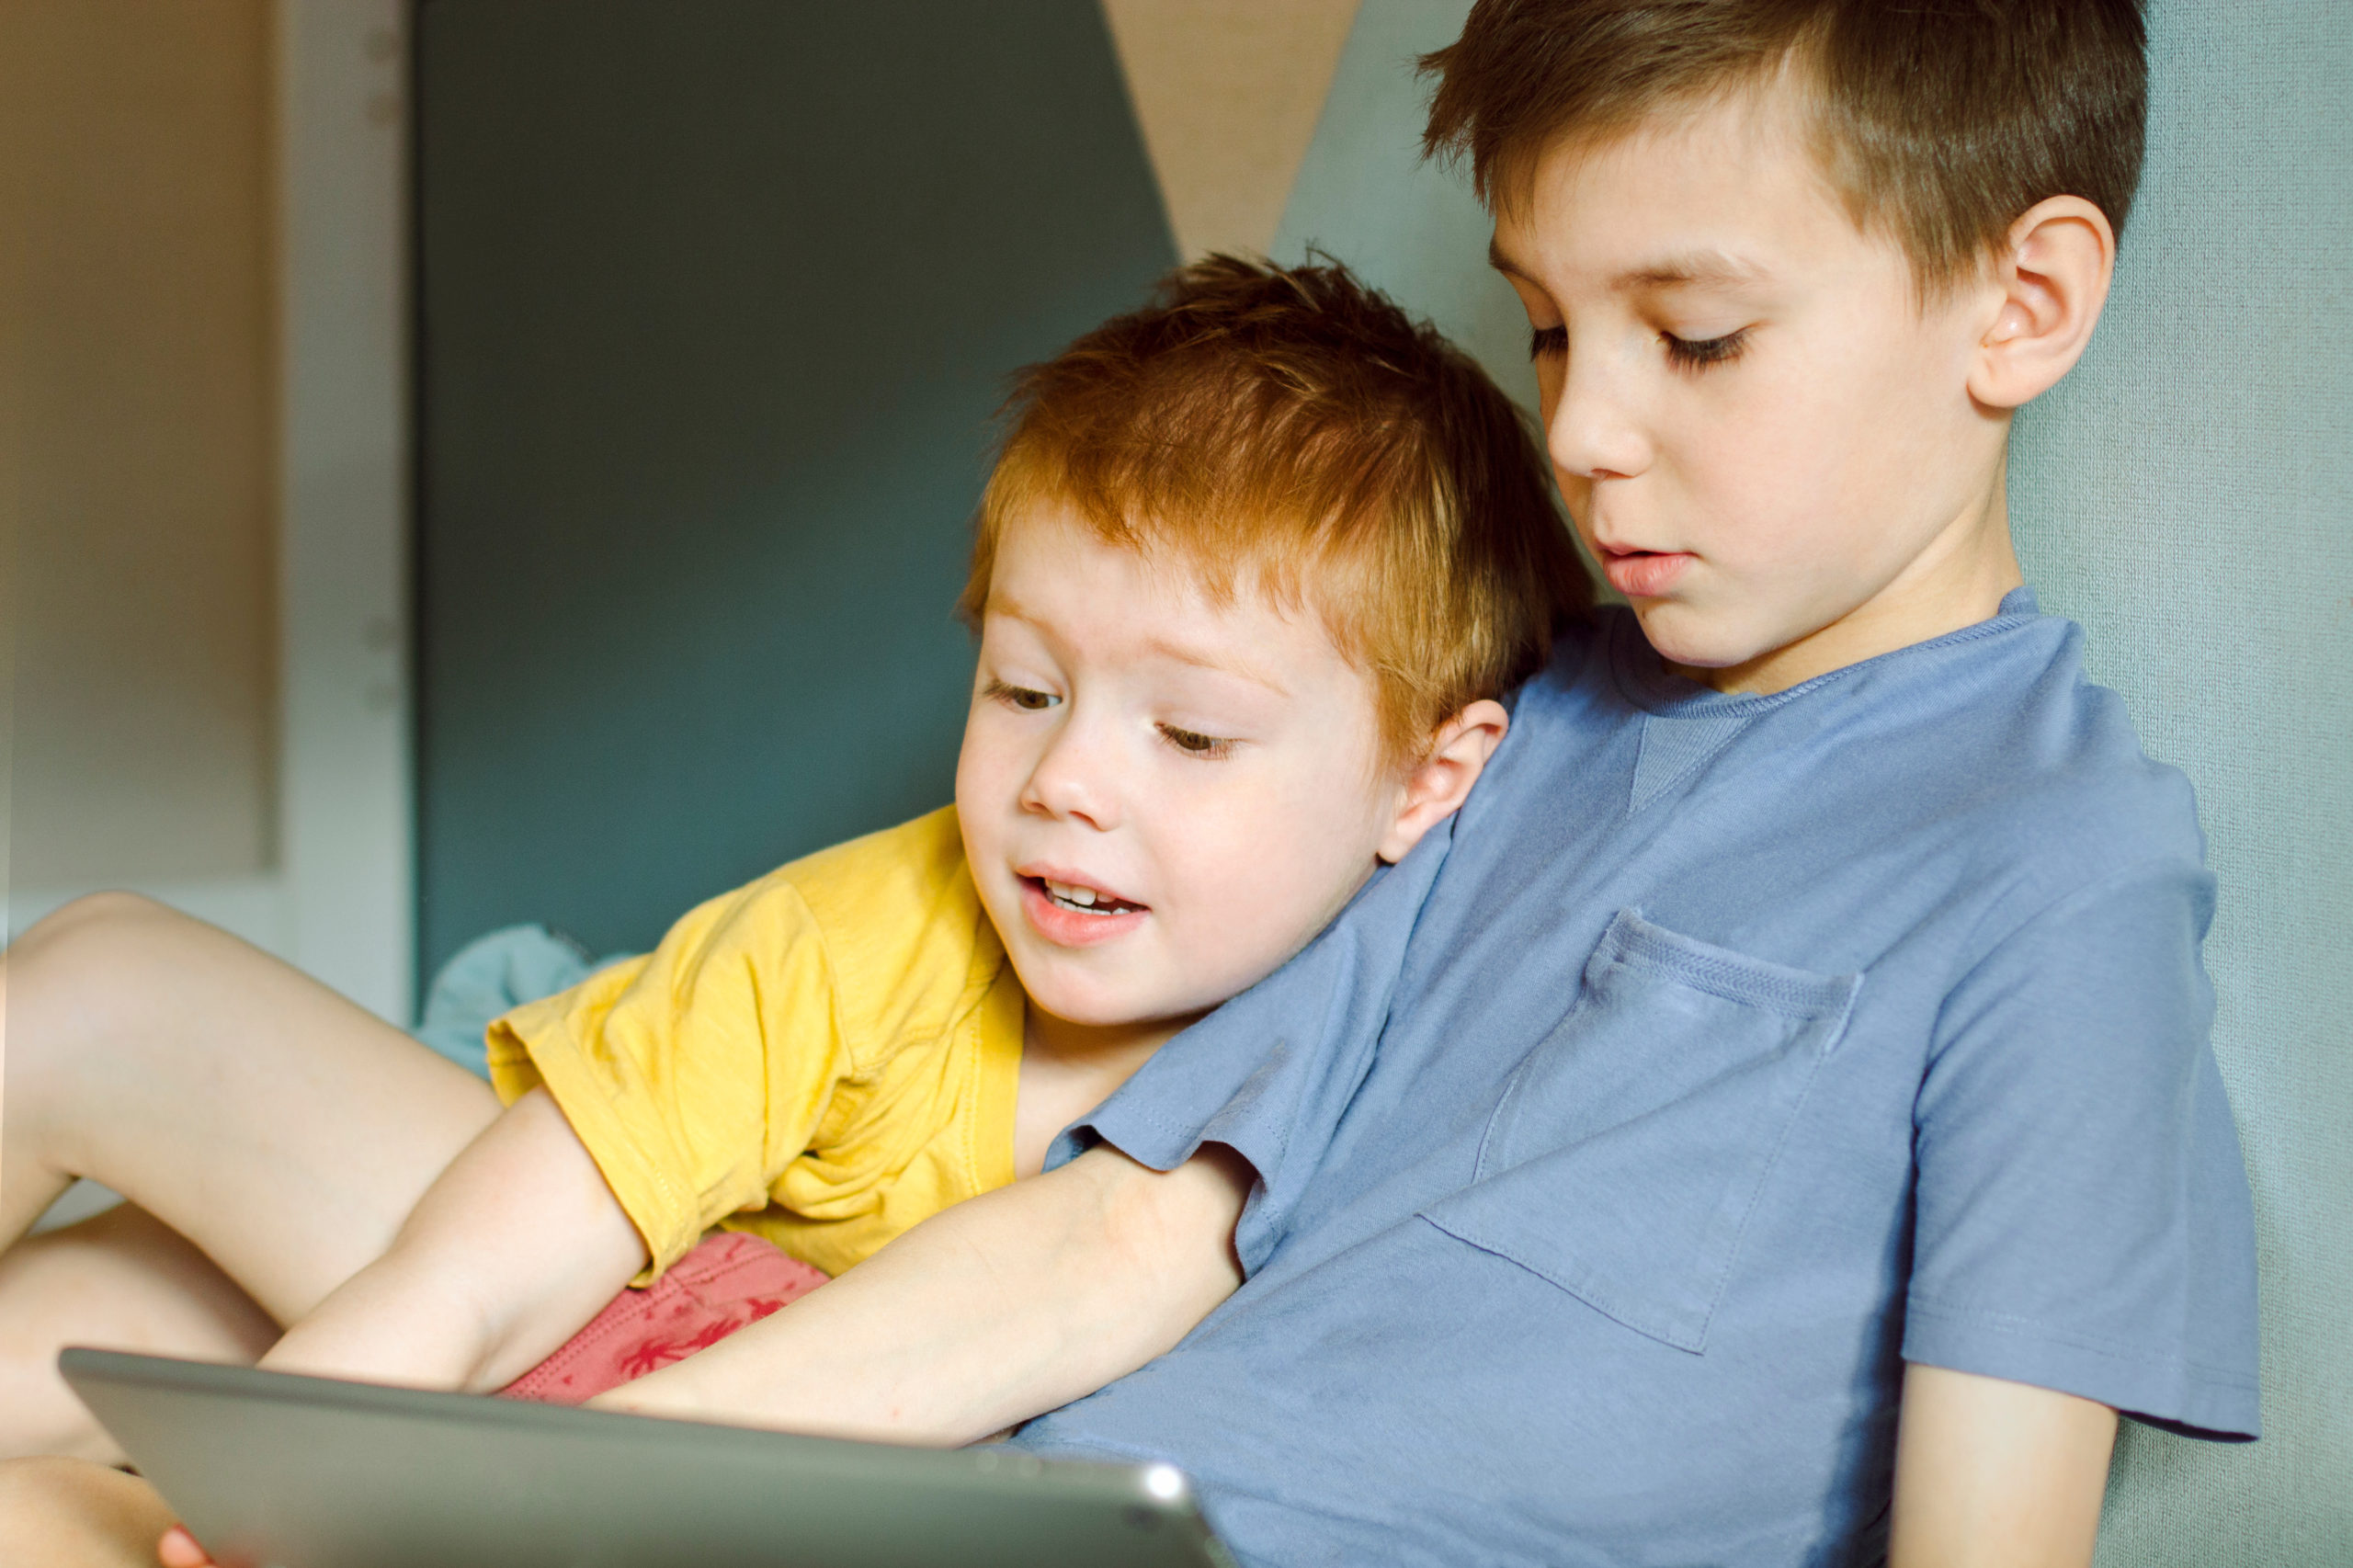 two boys aged 10 and 4 study something on a computer tablet toge